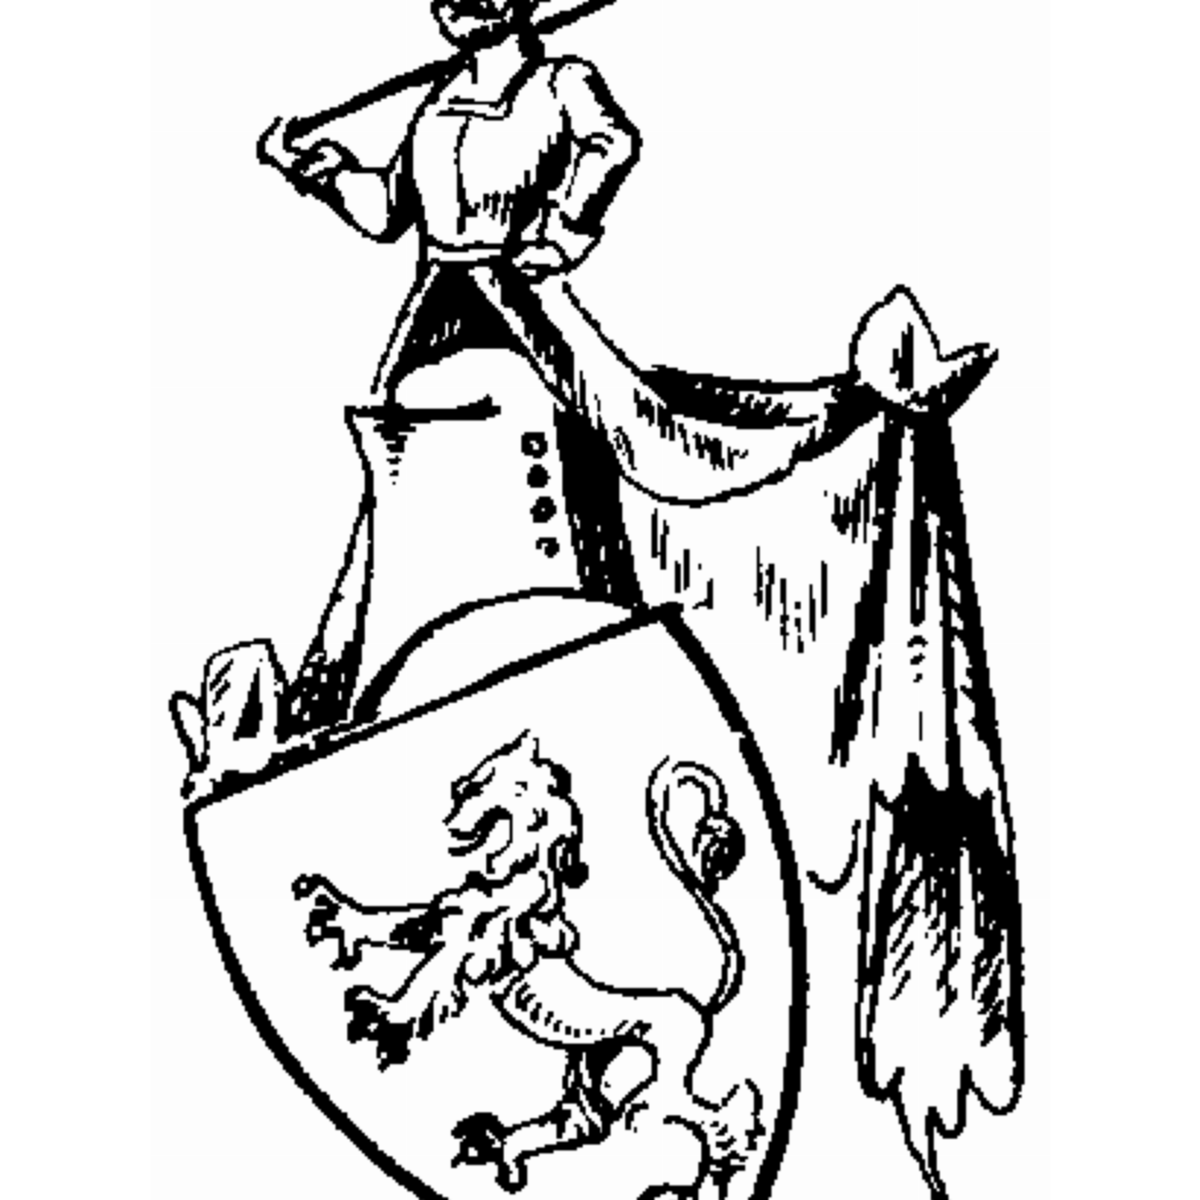 Coat of arms of family Negrini